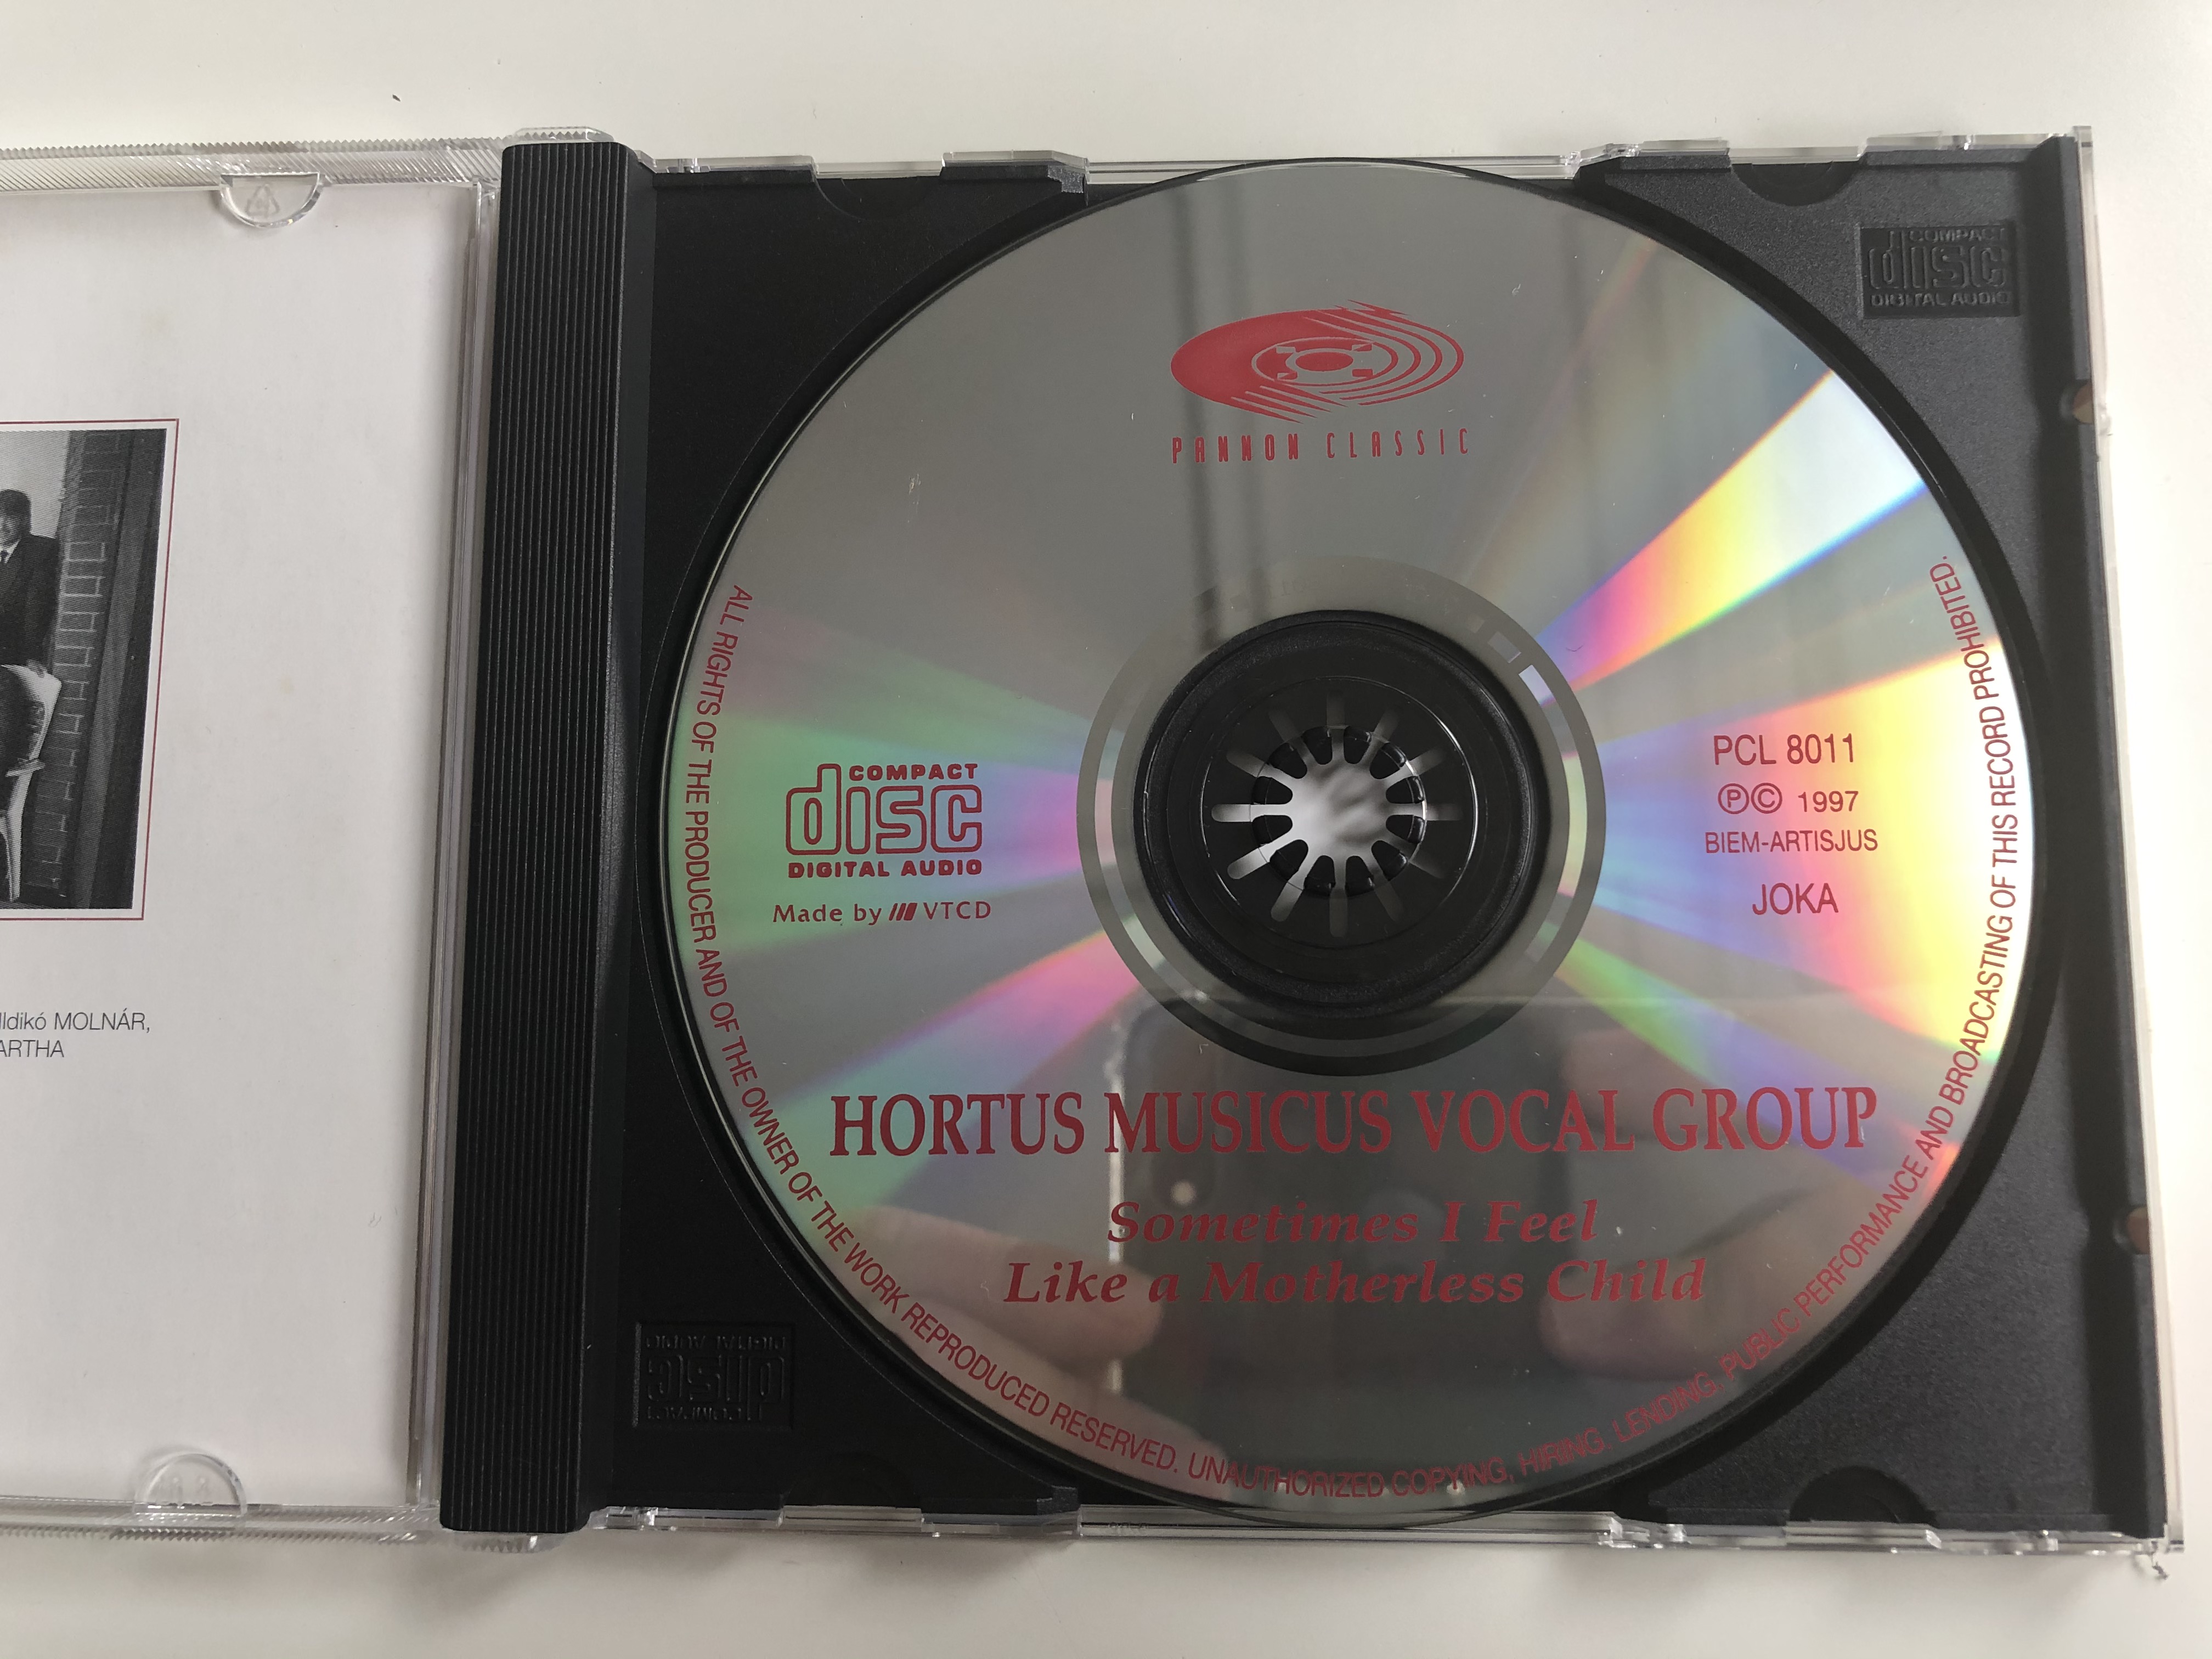 hortus-musicus-vocal-group-sometimes-i-feel-like-a-motherless-child-pannon-classic-audio-cd-1997-pcl-8011-4-.jpg